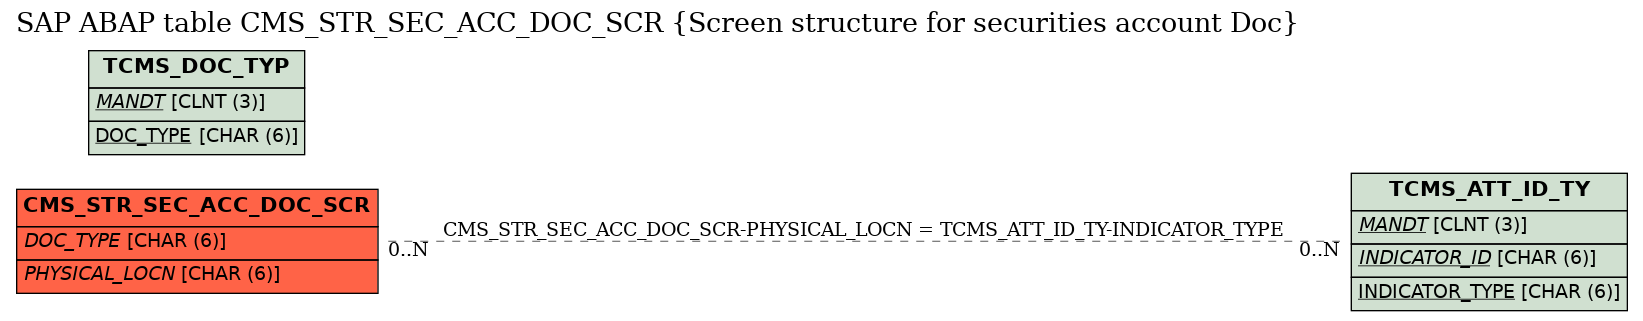 E-R Diagram for table CMS_STR_SEC_ACC_DOC_SCR (Screen structure for securities account Doc)